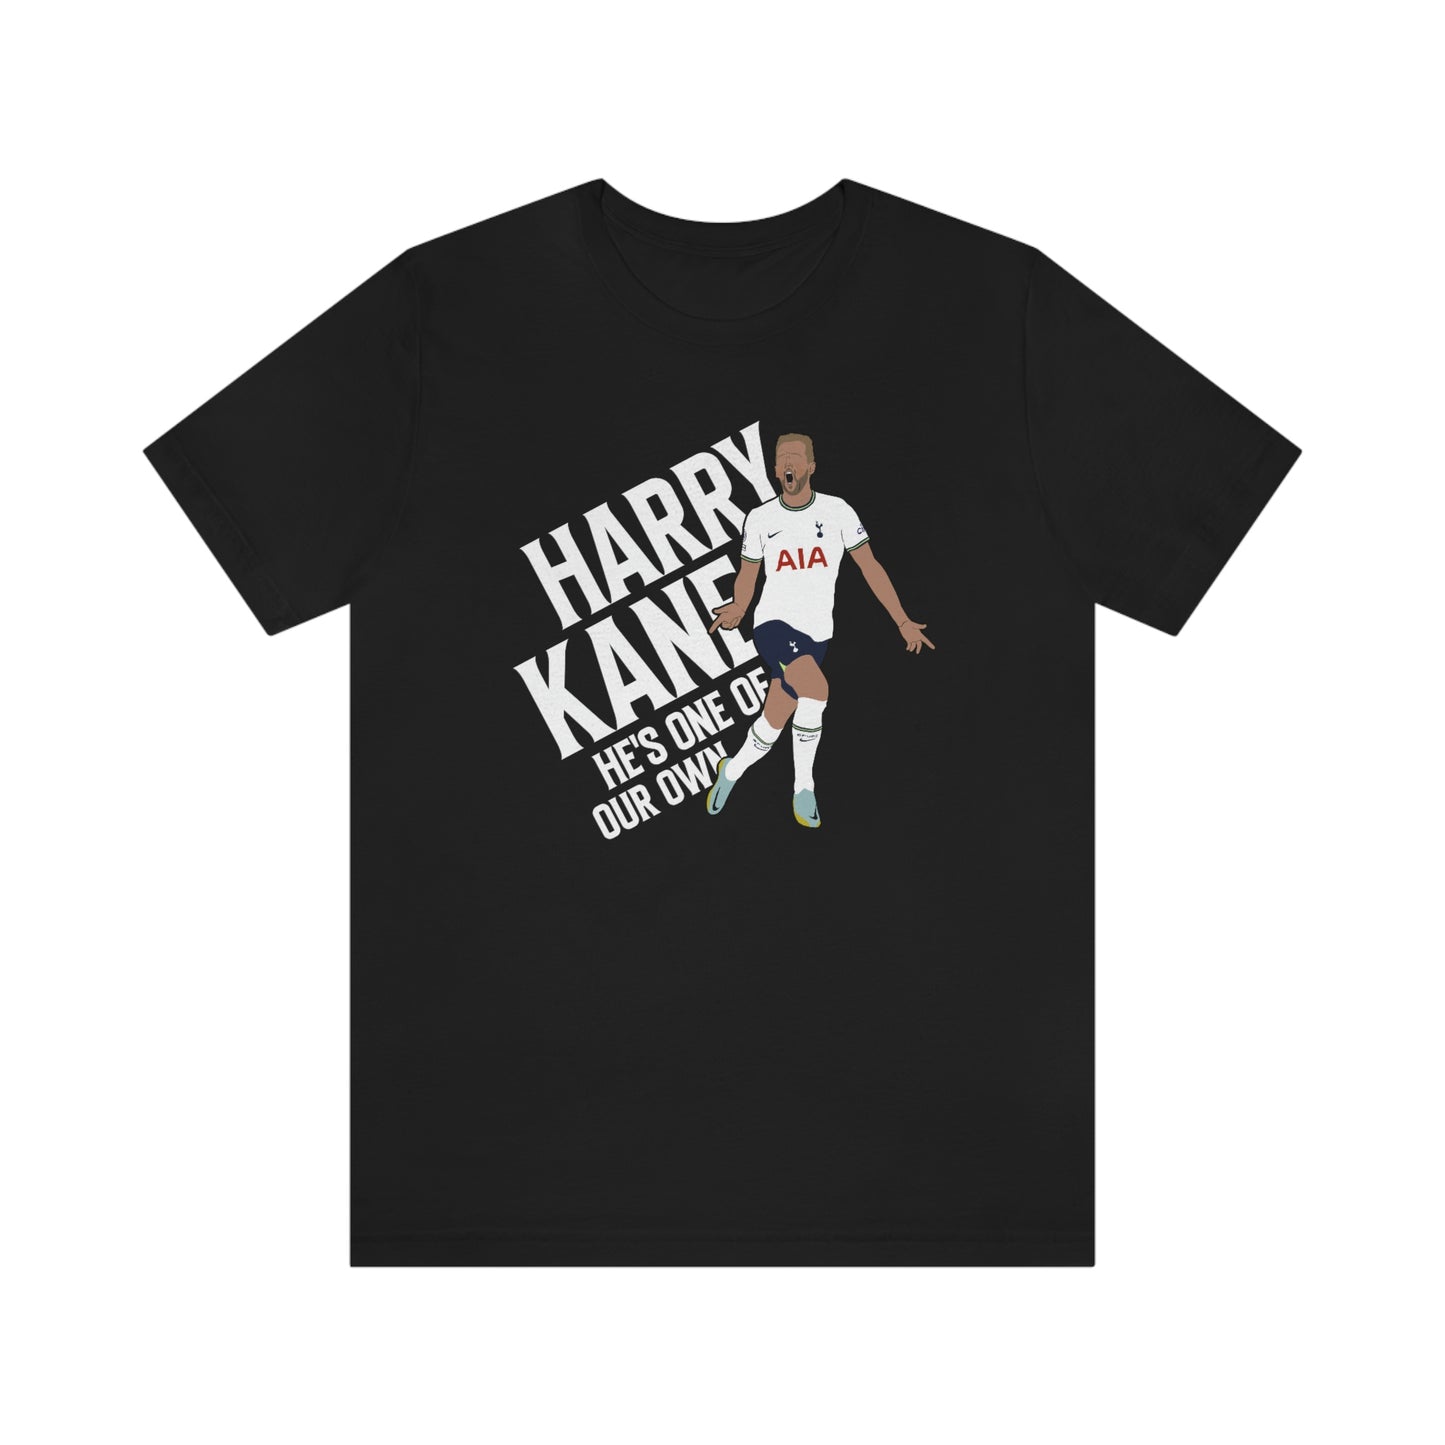 Harry Kane He's One Of Our Own Tottenham Hotspur T-Shirt